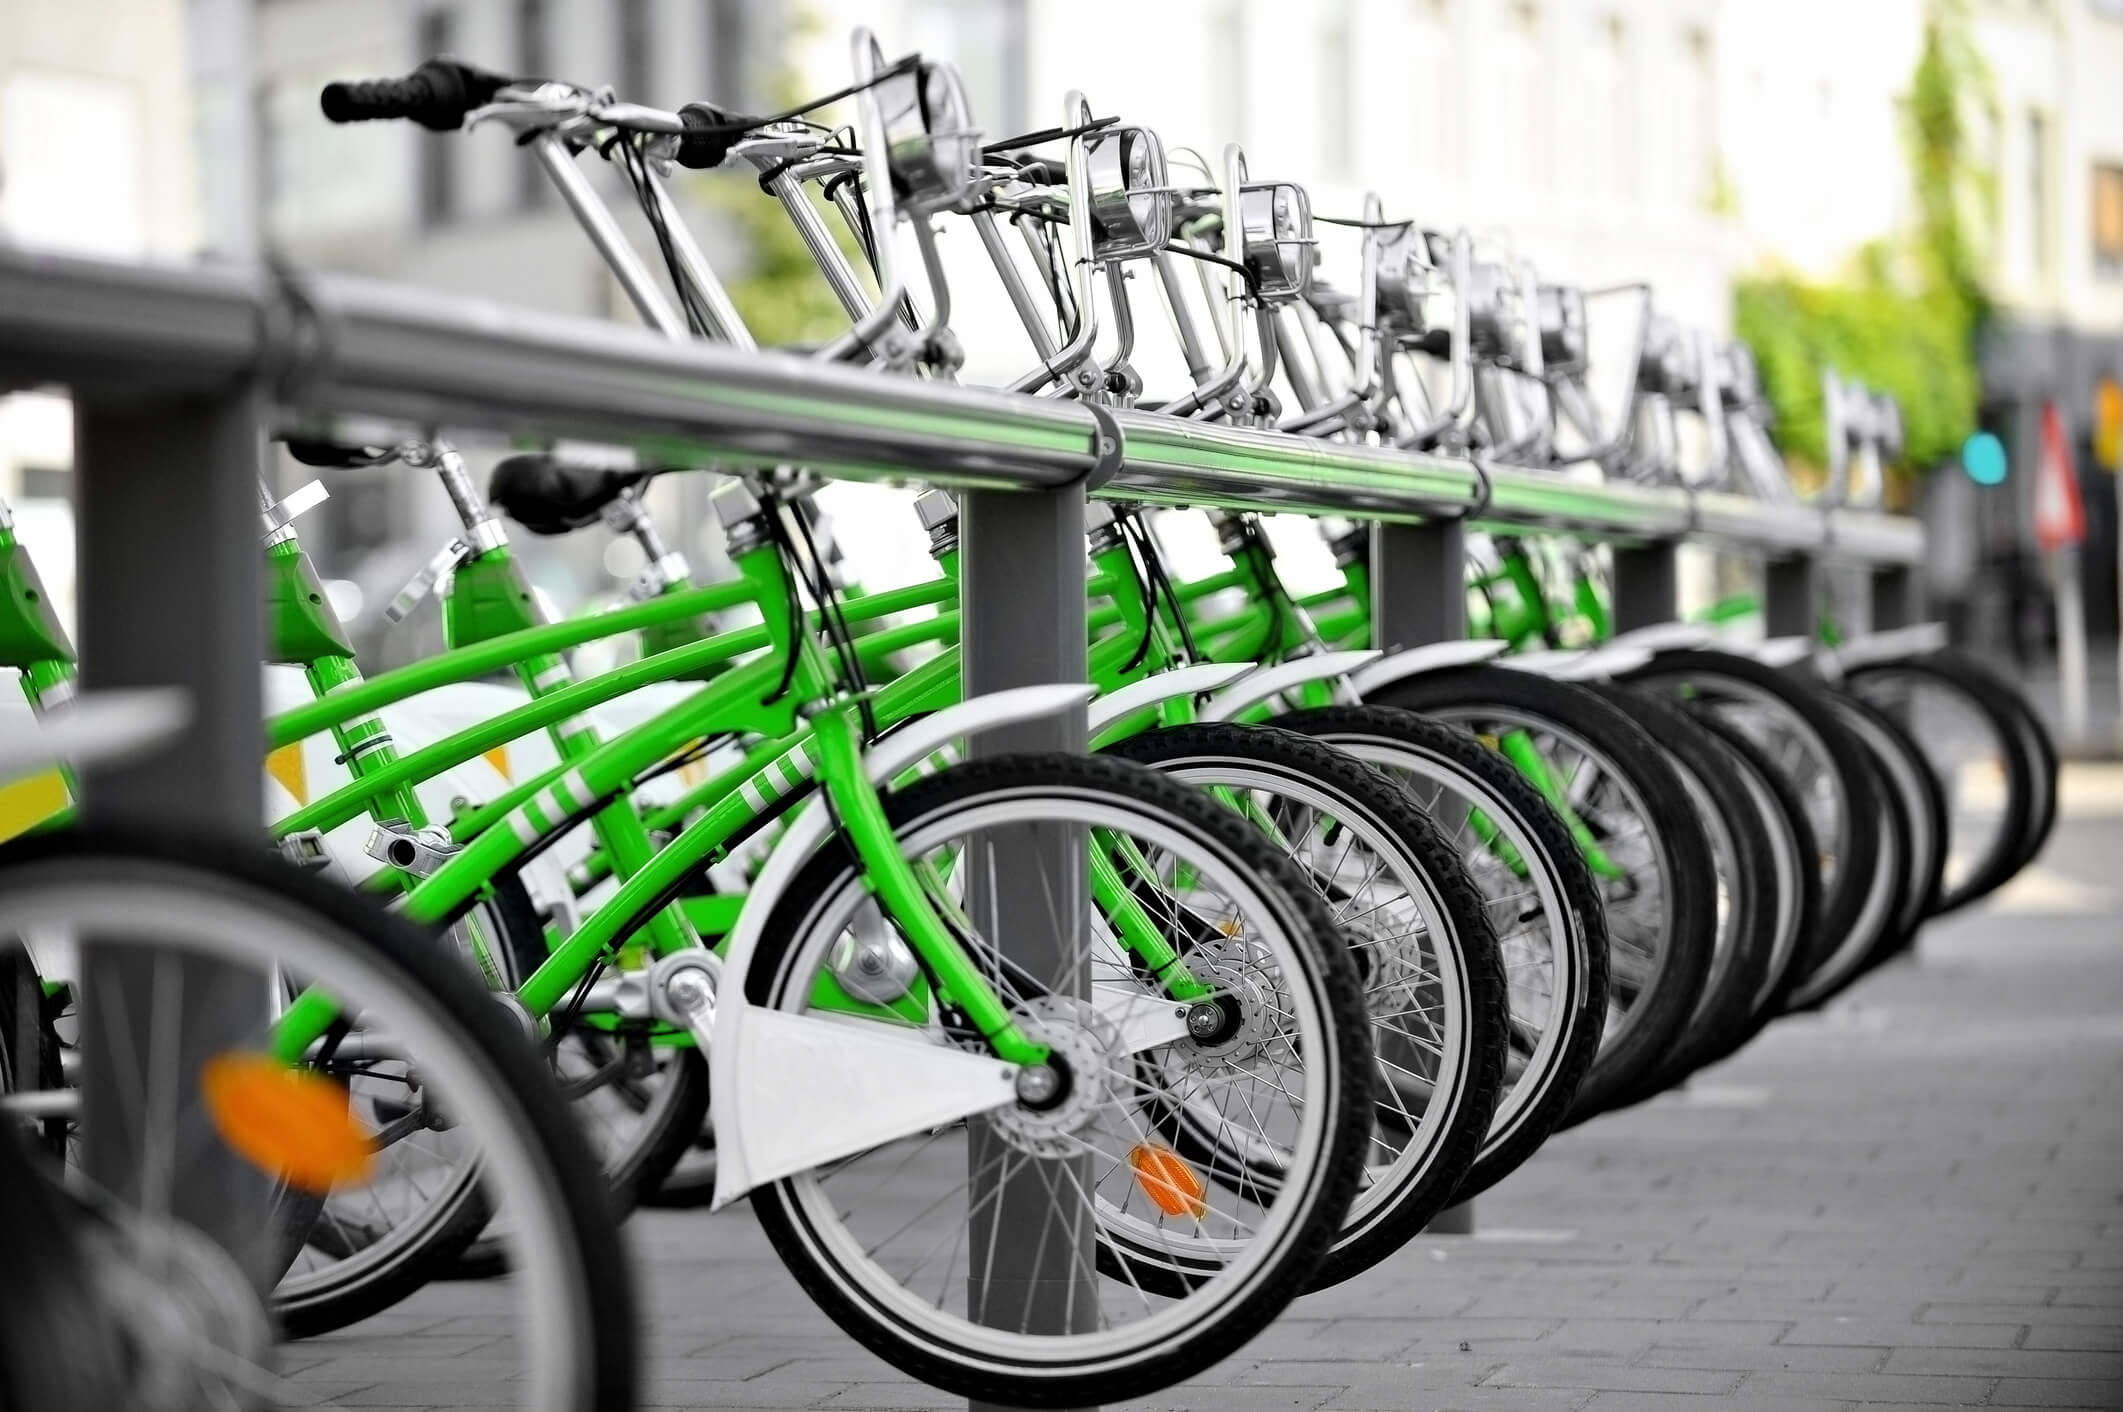 All About Seattle’s Bike Share Program